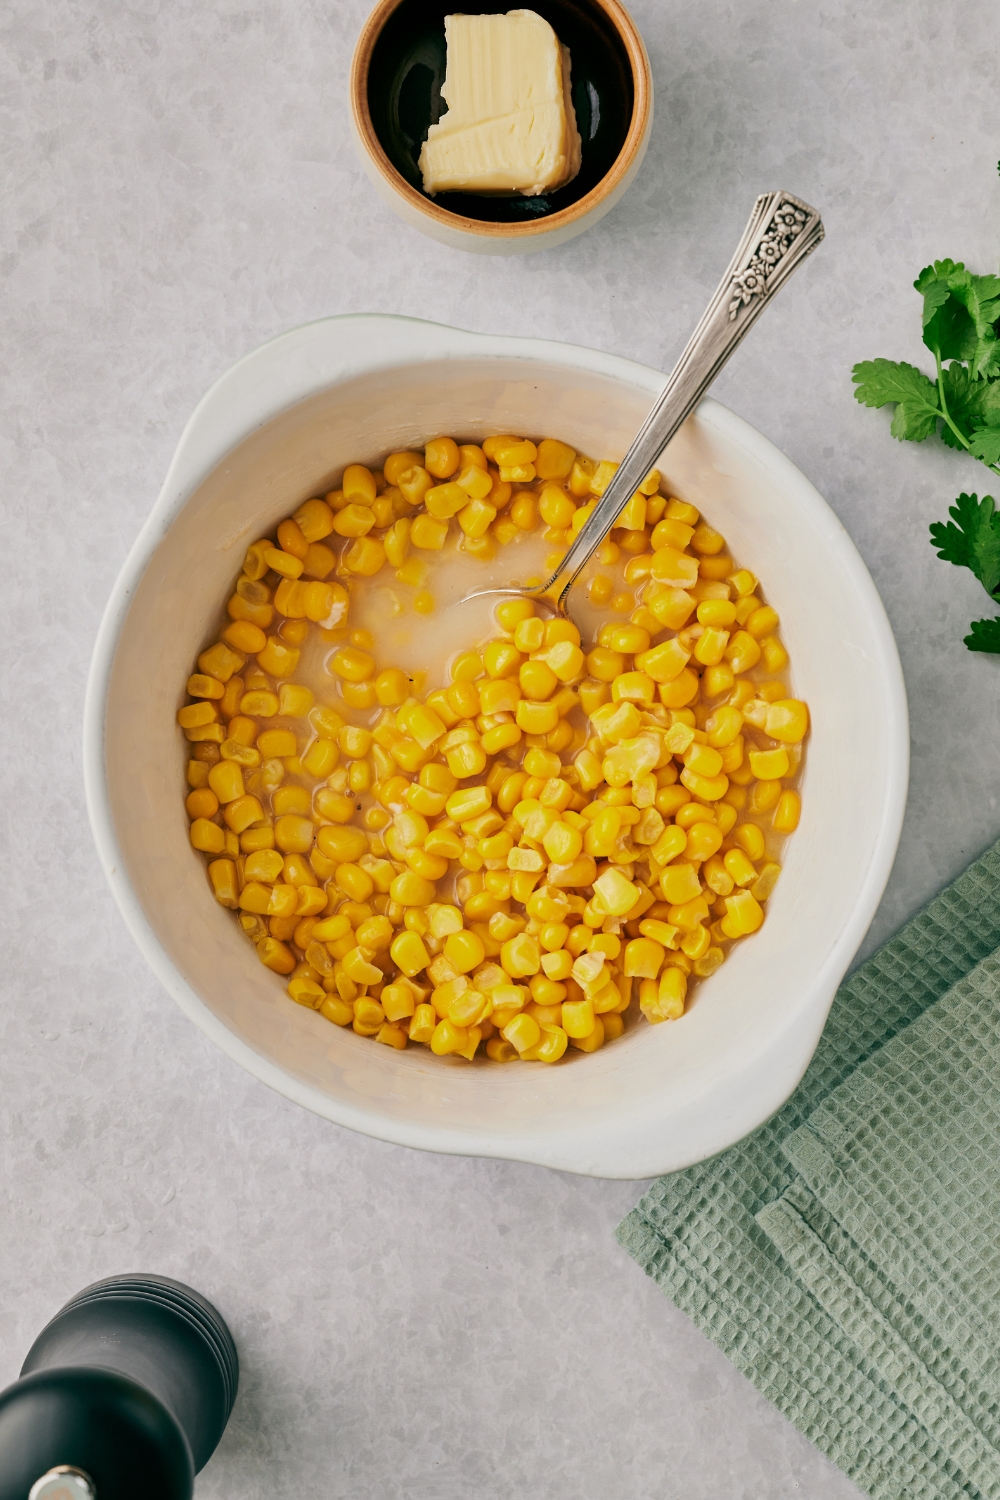 A mixing bowl with corn being mixed with all the ingredients.